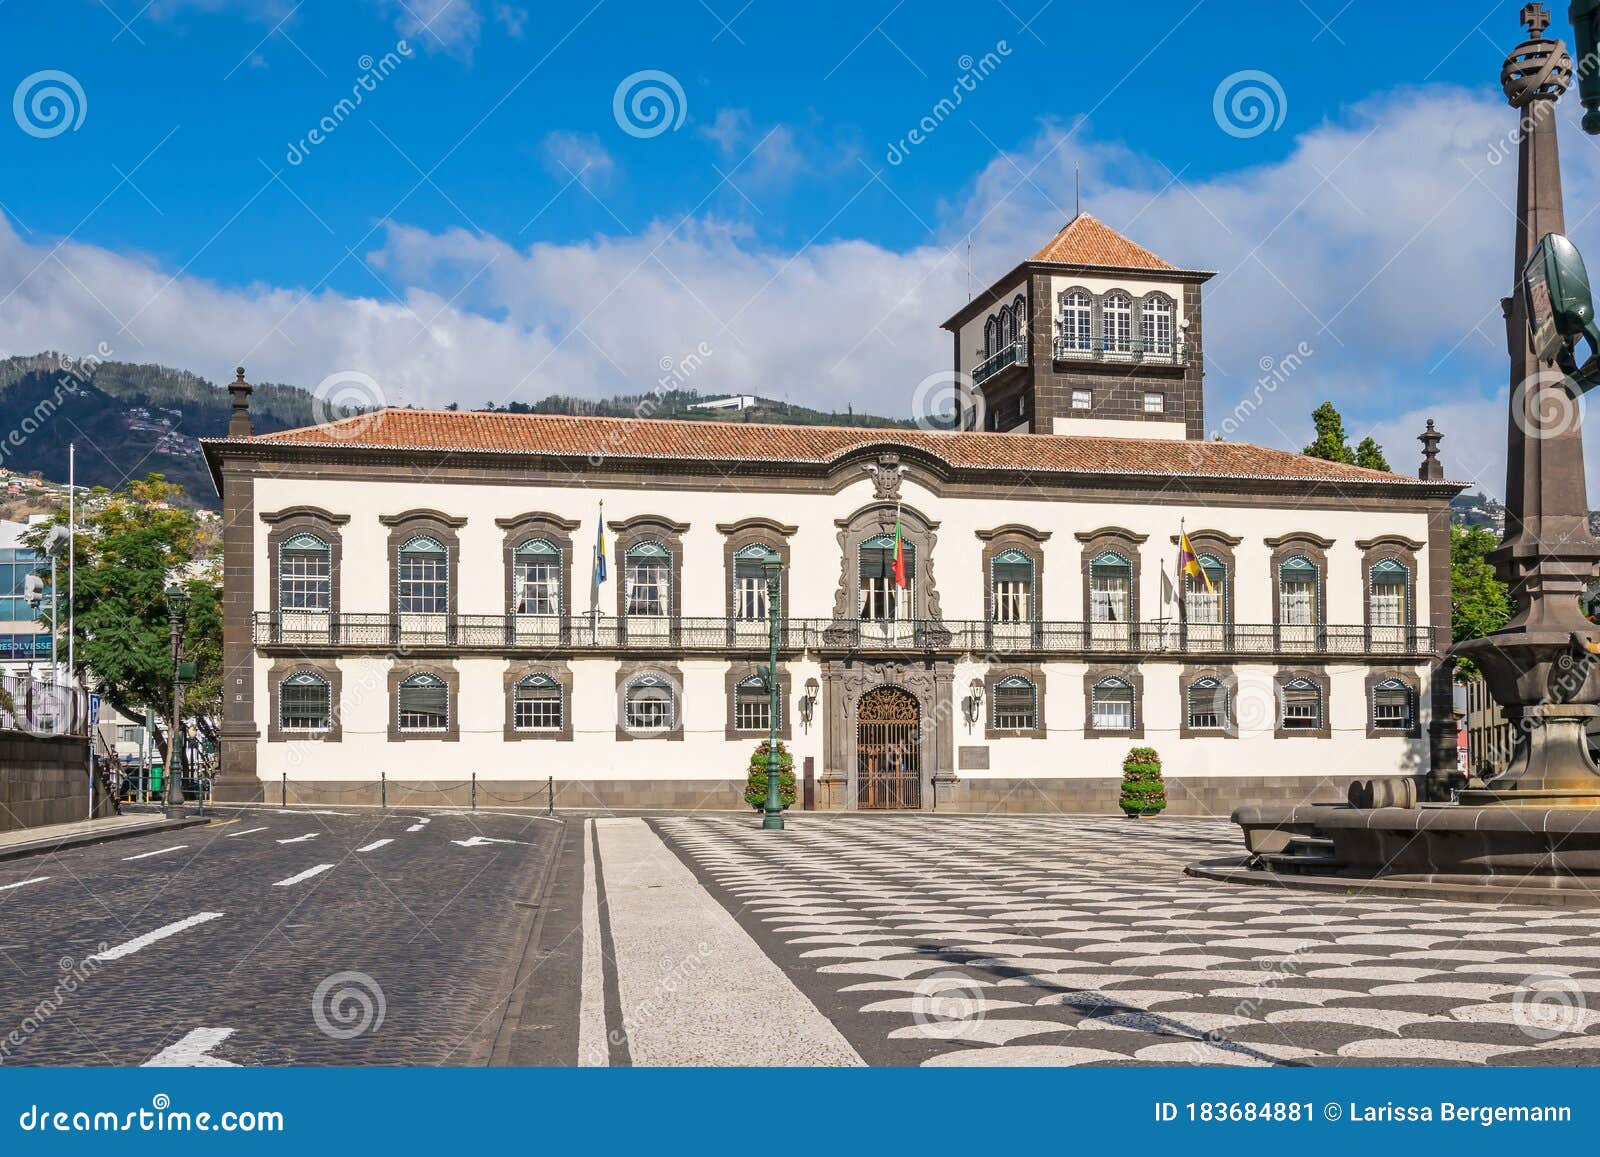 praca do municipio with the town hall in funchal, madeira